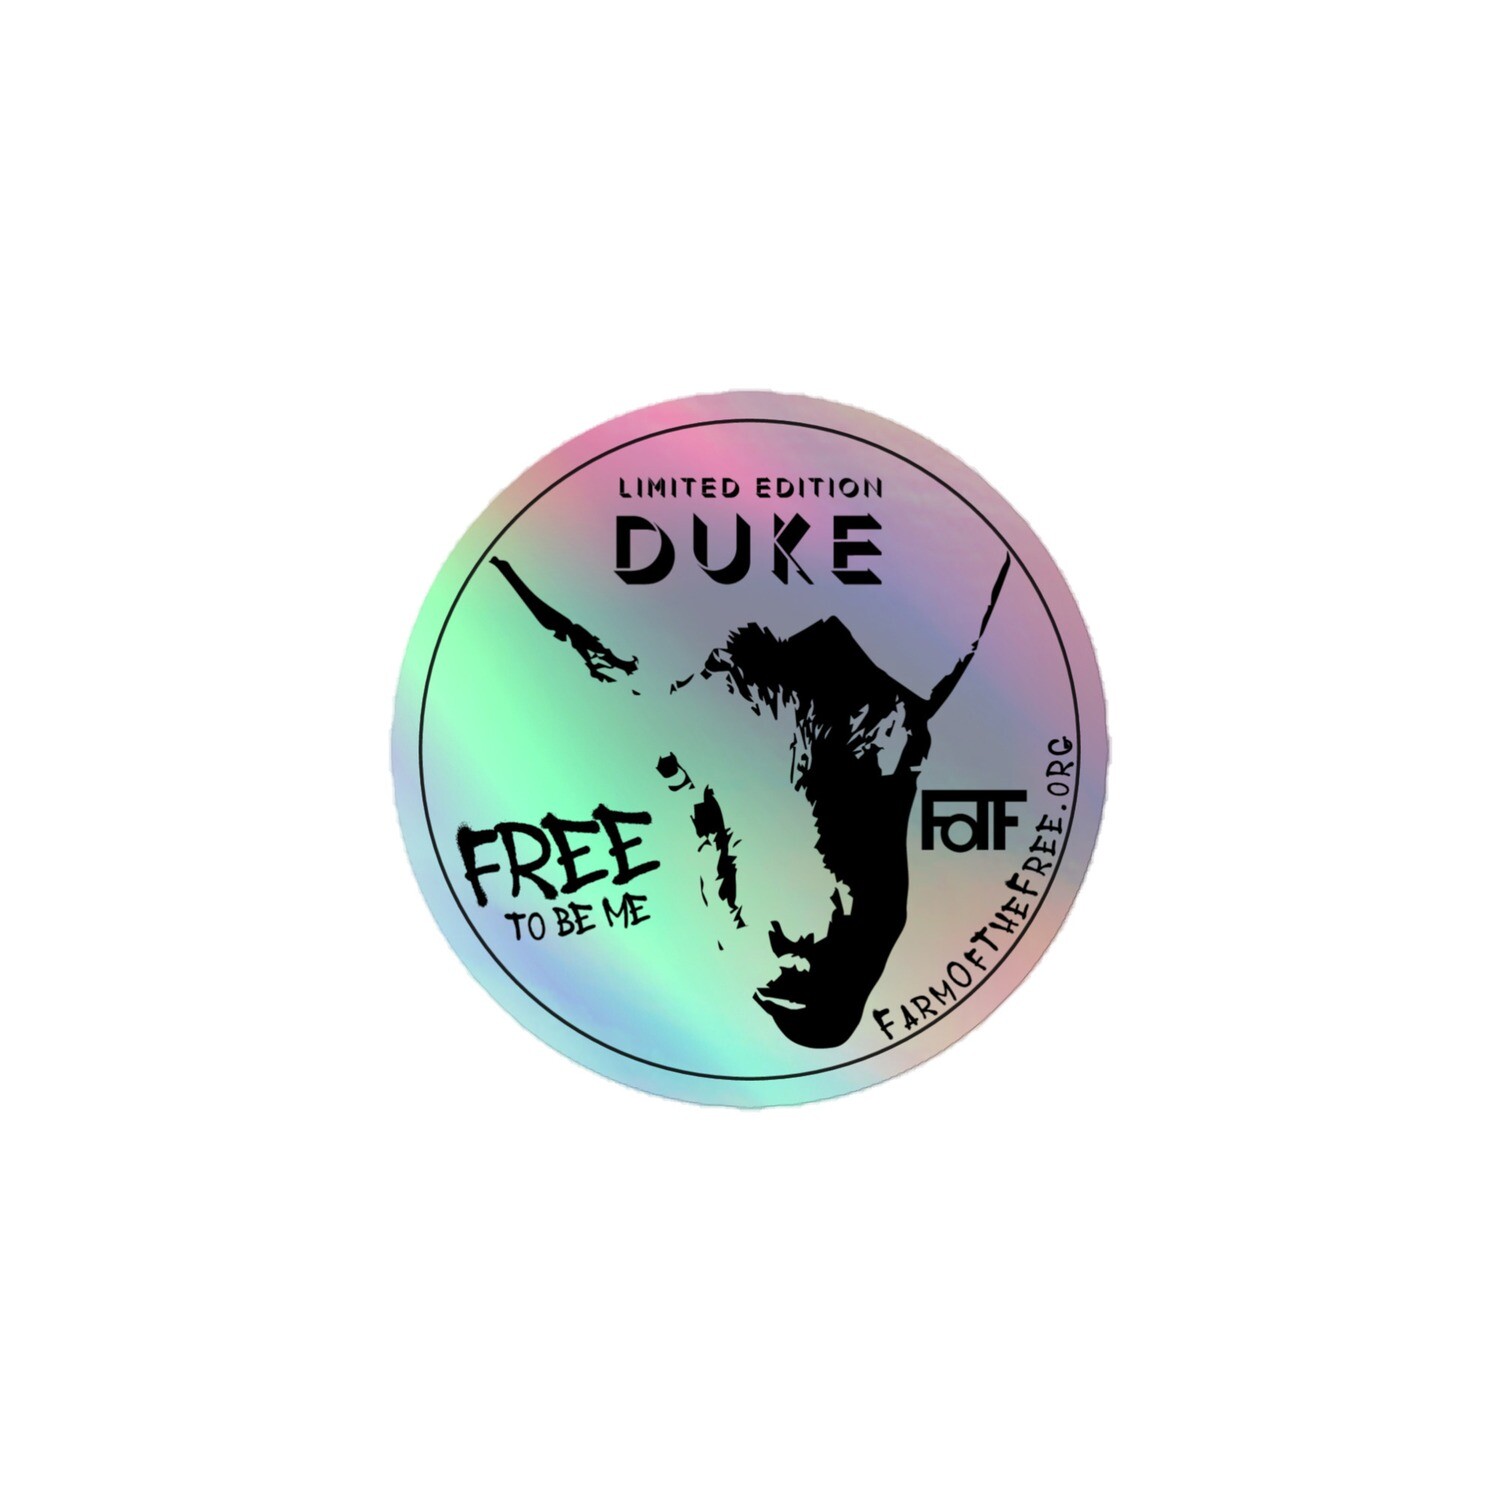 3" Duke holographic stickers